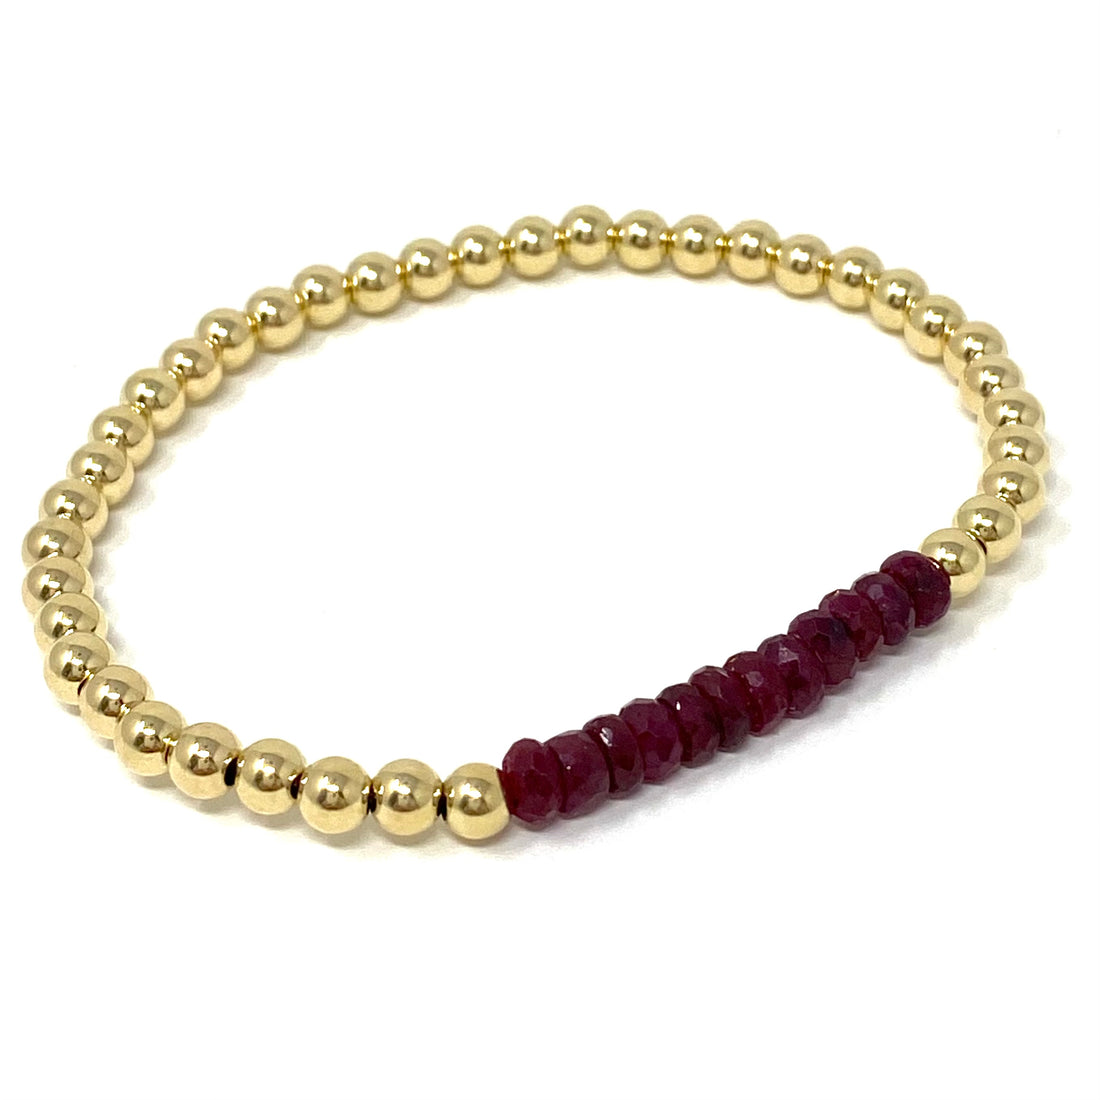 Sofia Ball Bracelet with Ruby Red Jade in Gold